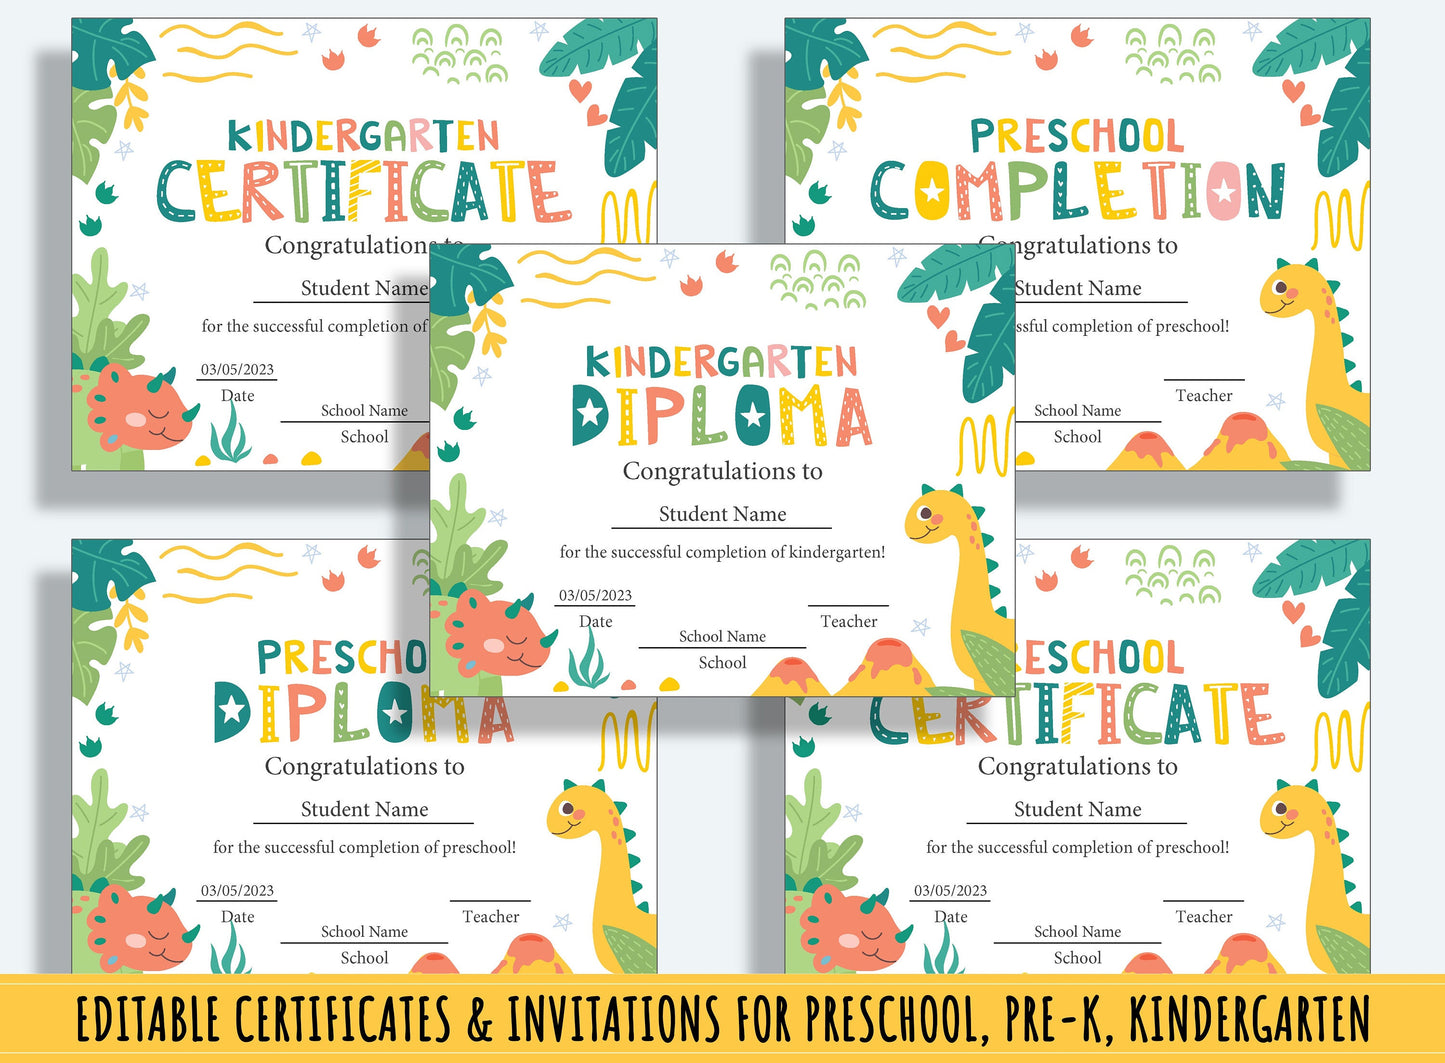 37 Pages of Editable Diplomas, Certificates, and Invitations for Preschool and Kindergarten: Customize Your Own Designs, Instant Download